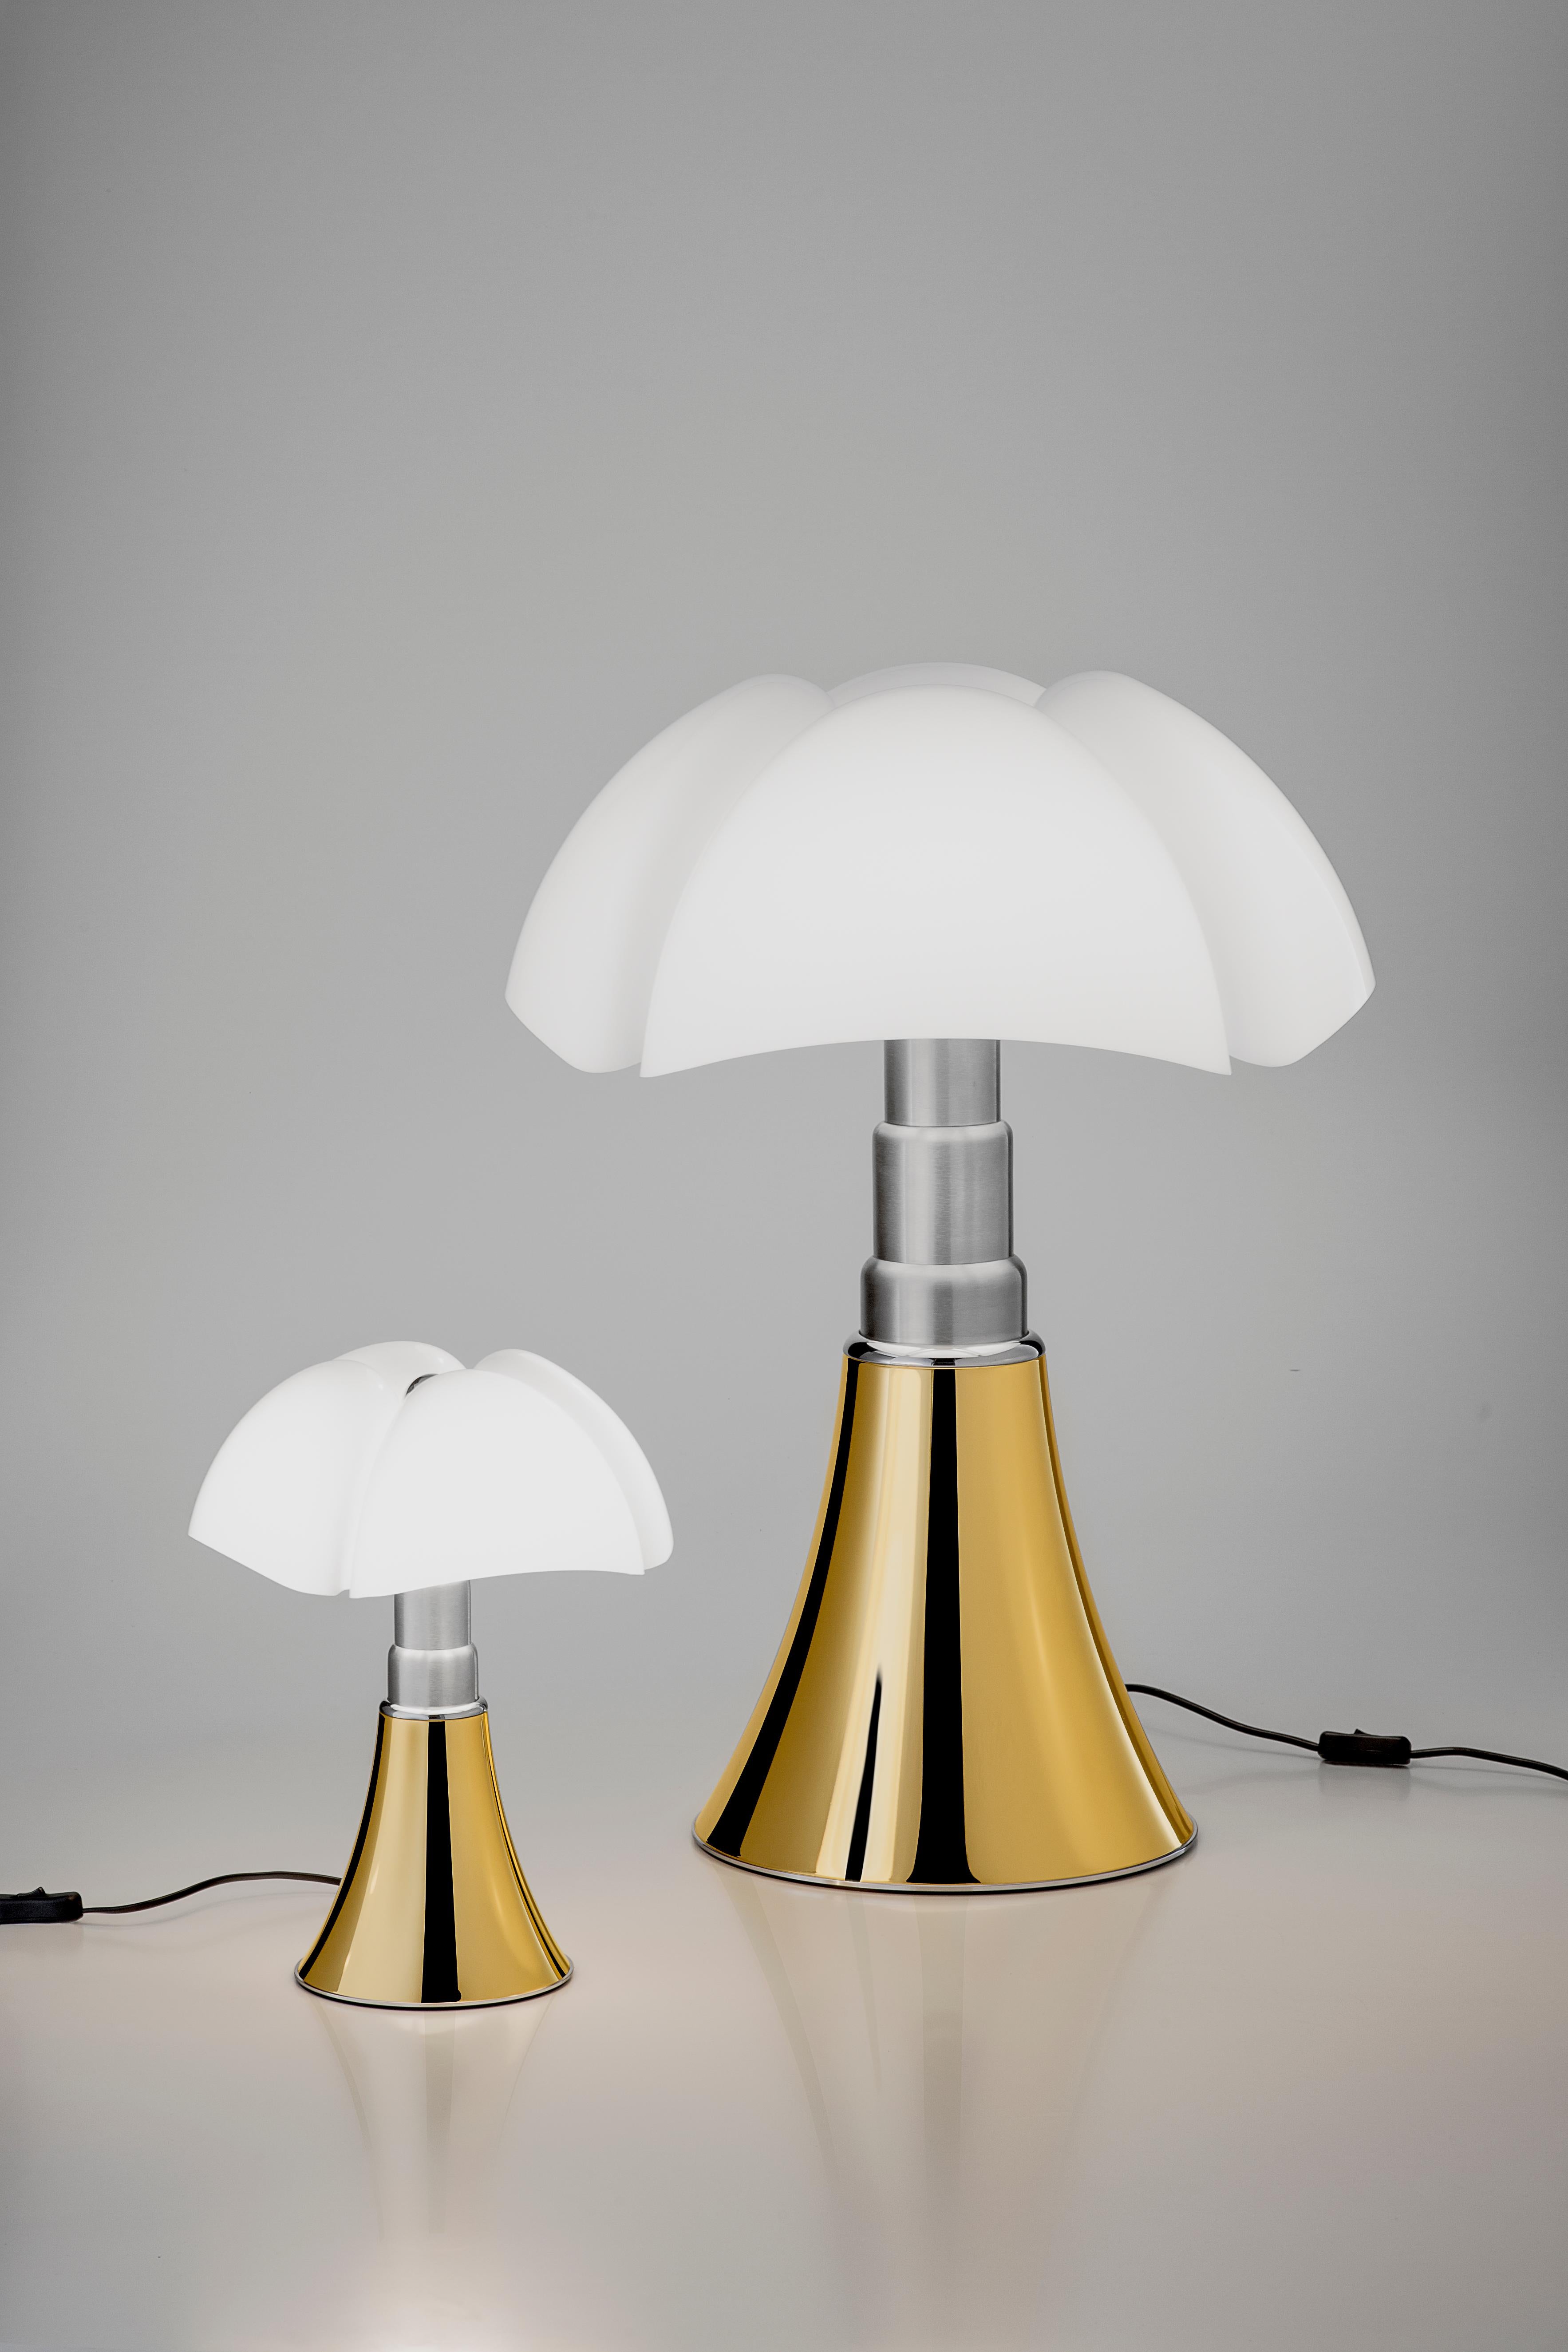 Stainless Steel Martinelli Luce Dimmable LED Pipistrello 620 Table Lamp by Gae Aulenti For Sale